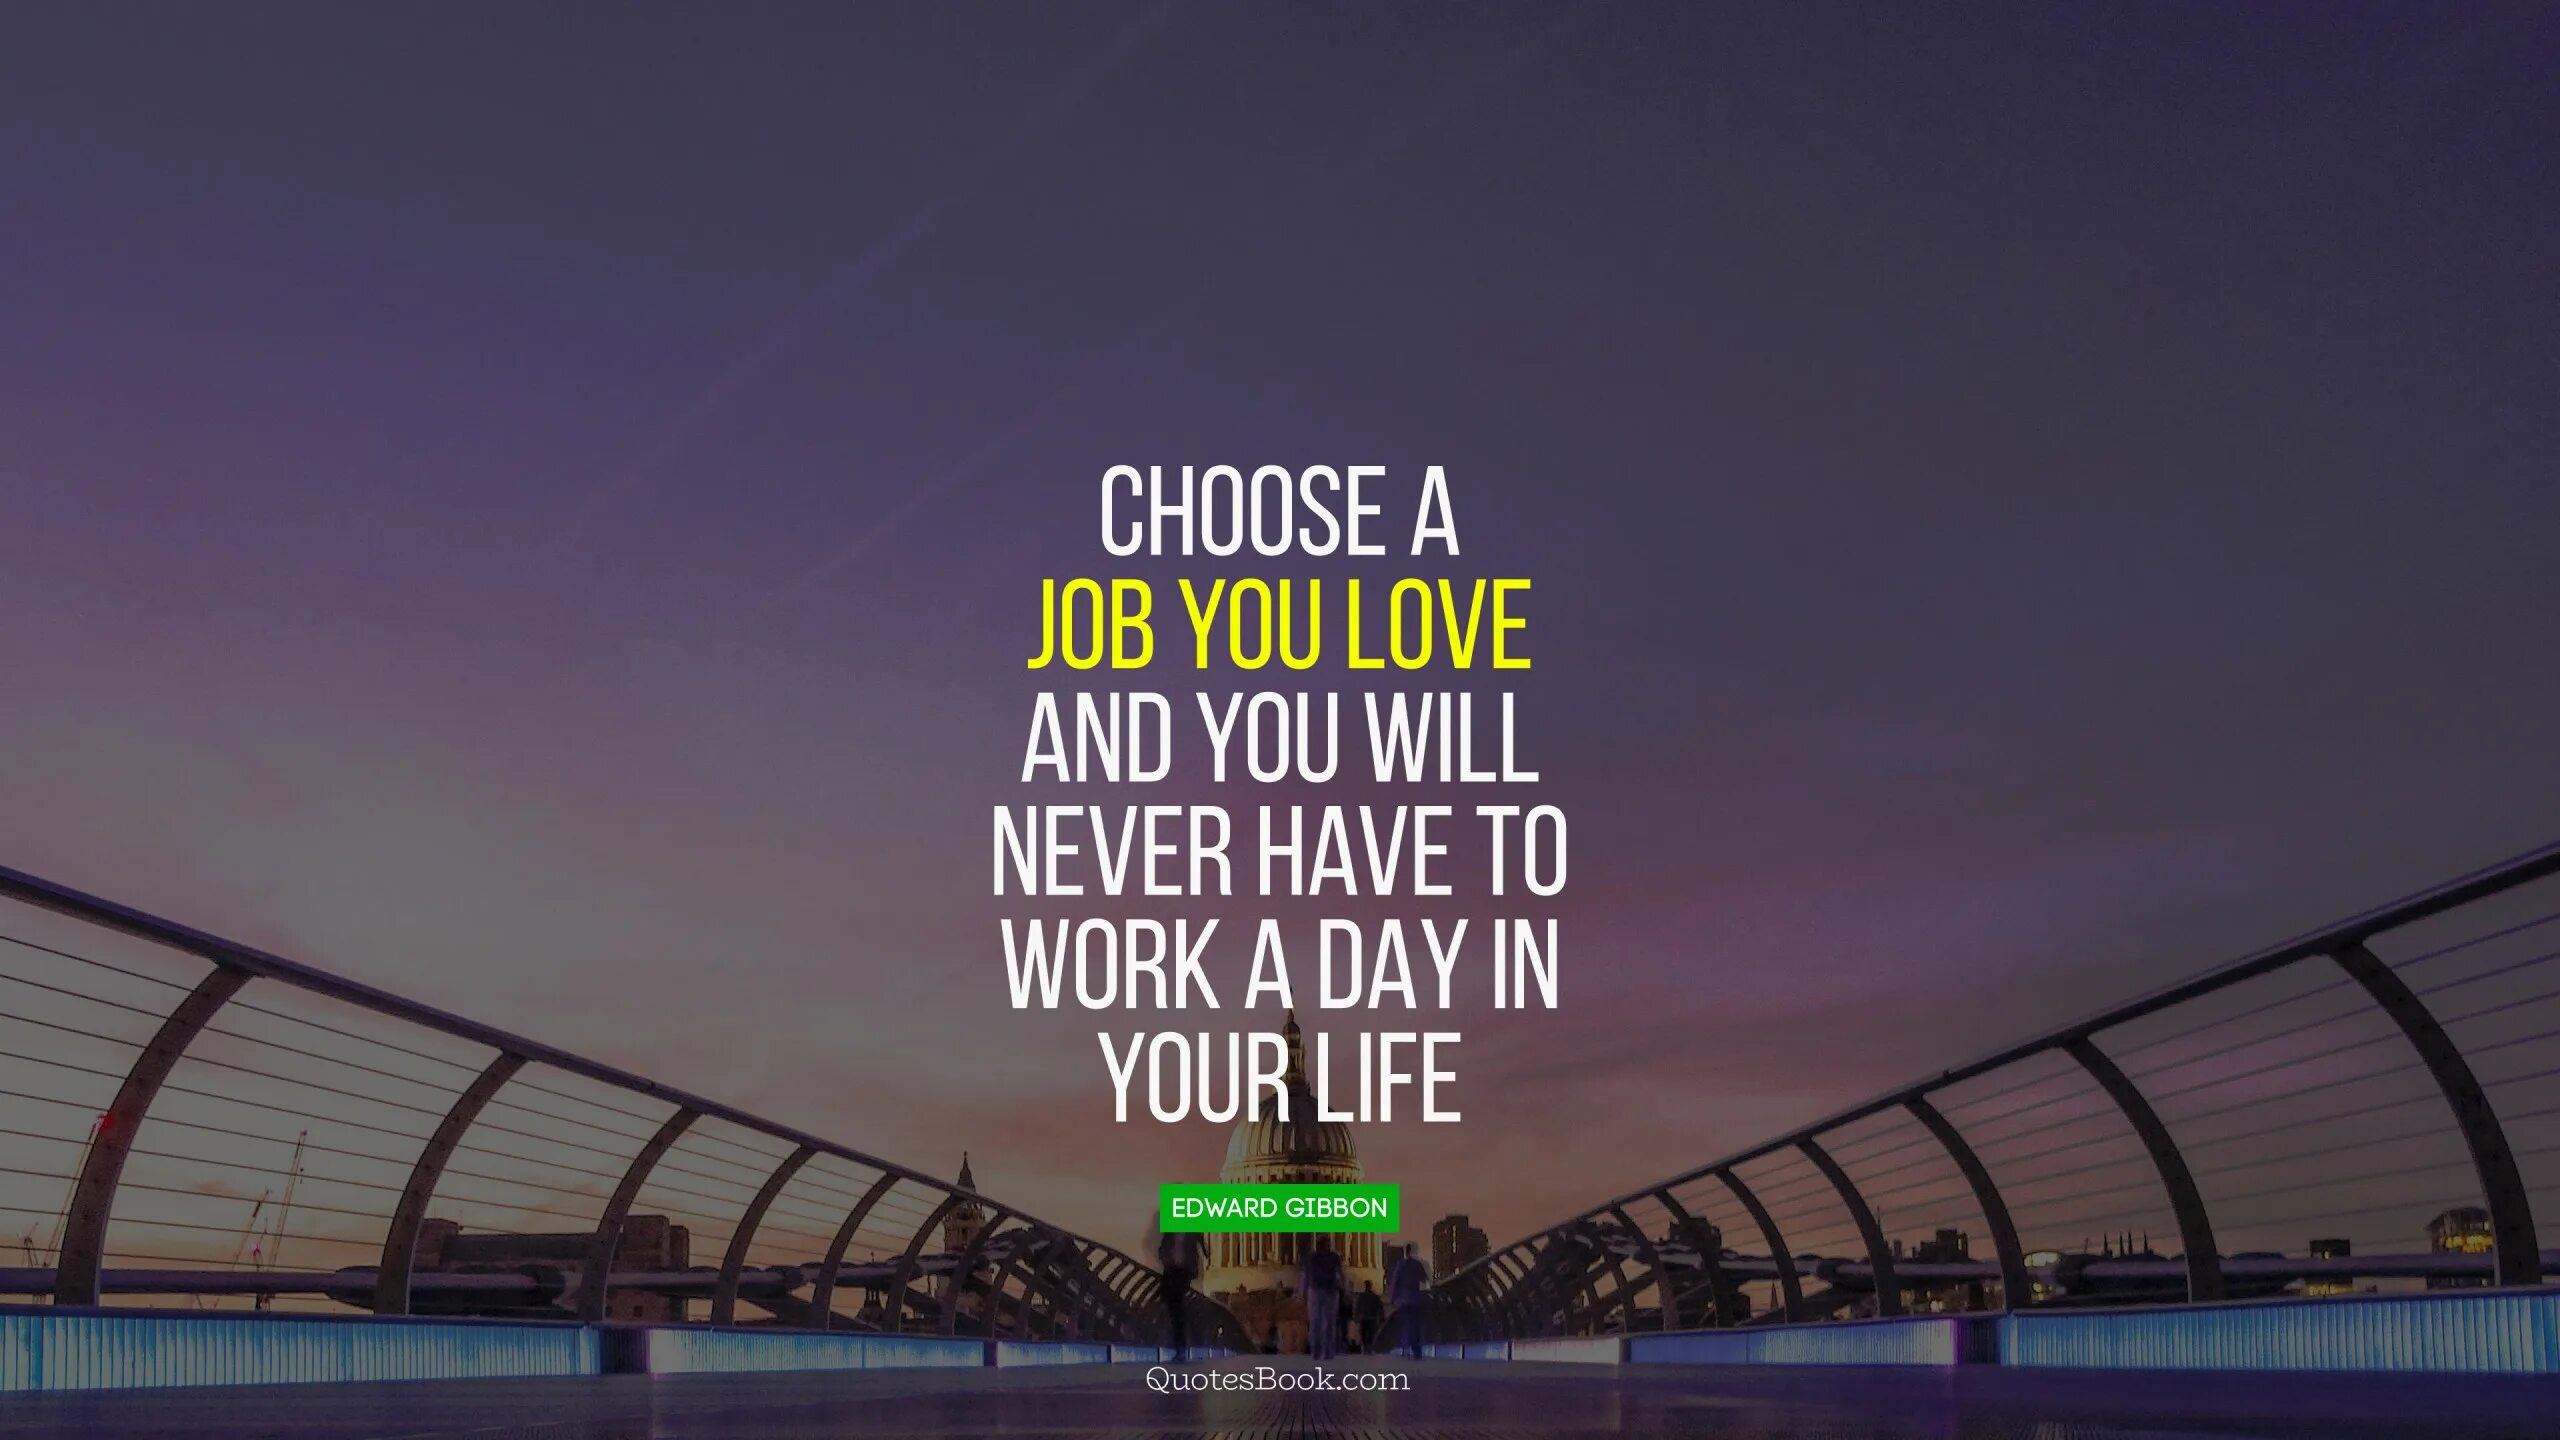 Choose a job you Love. Choose a job you Love, and you will never have to work a Day in your Life. Day in your Life. Choose the job you like and you will never work a Day.